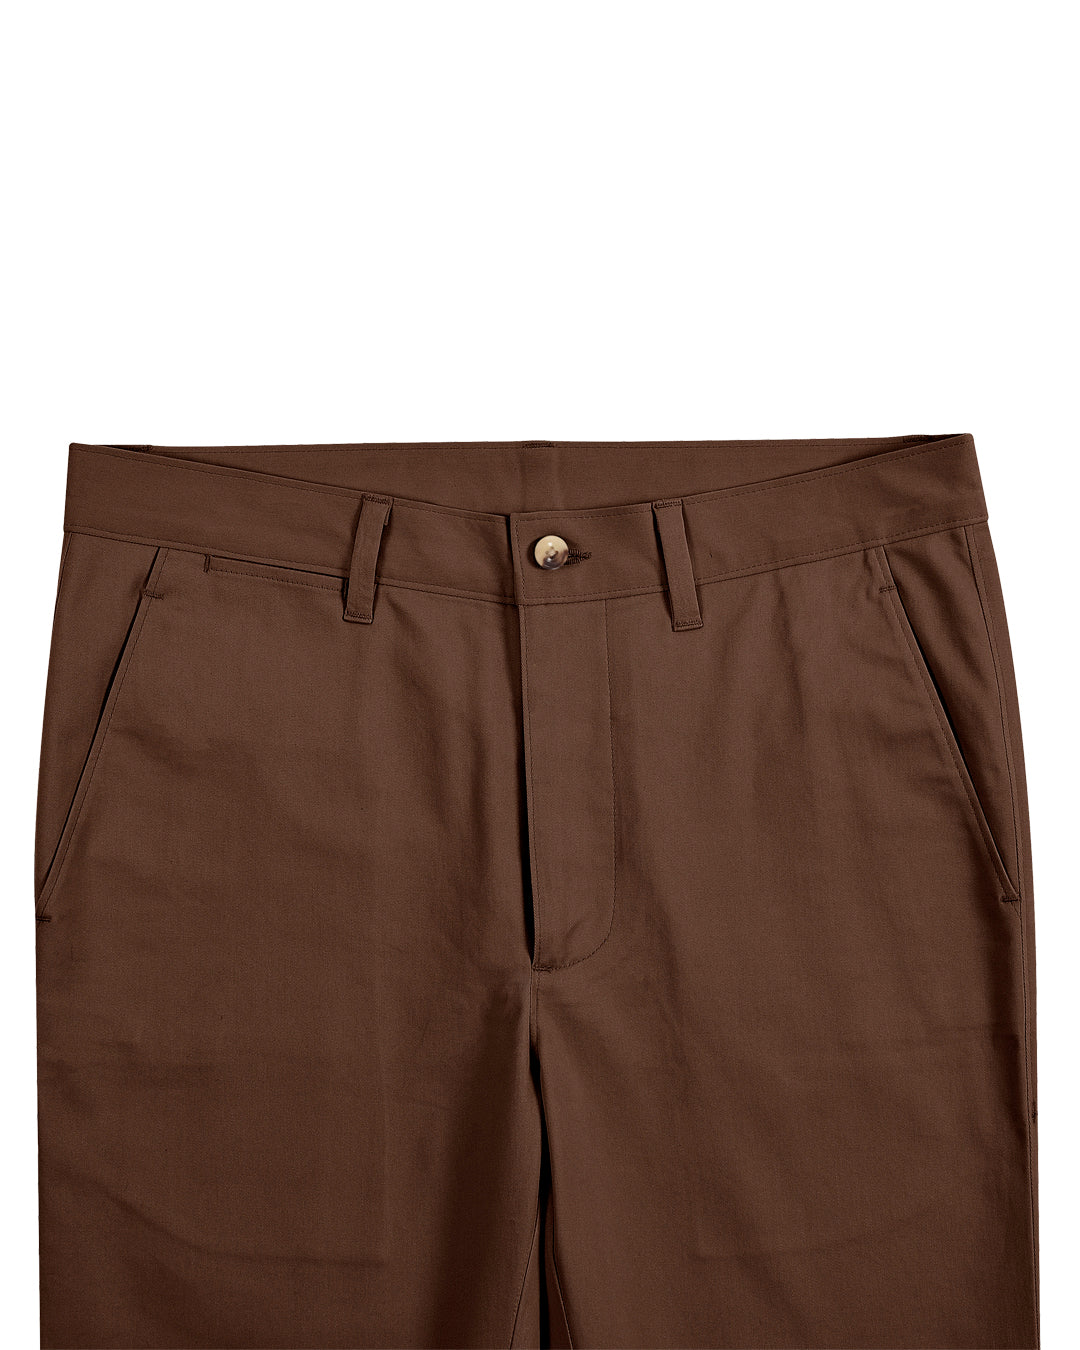 Front view of custom Genoa Chino pants for men by Luxire in chestnut brown